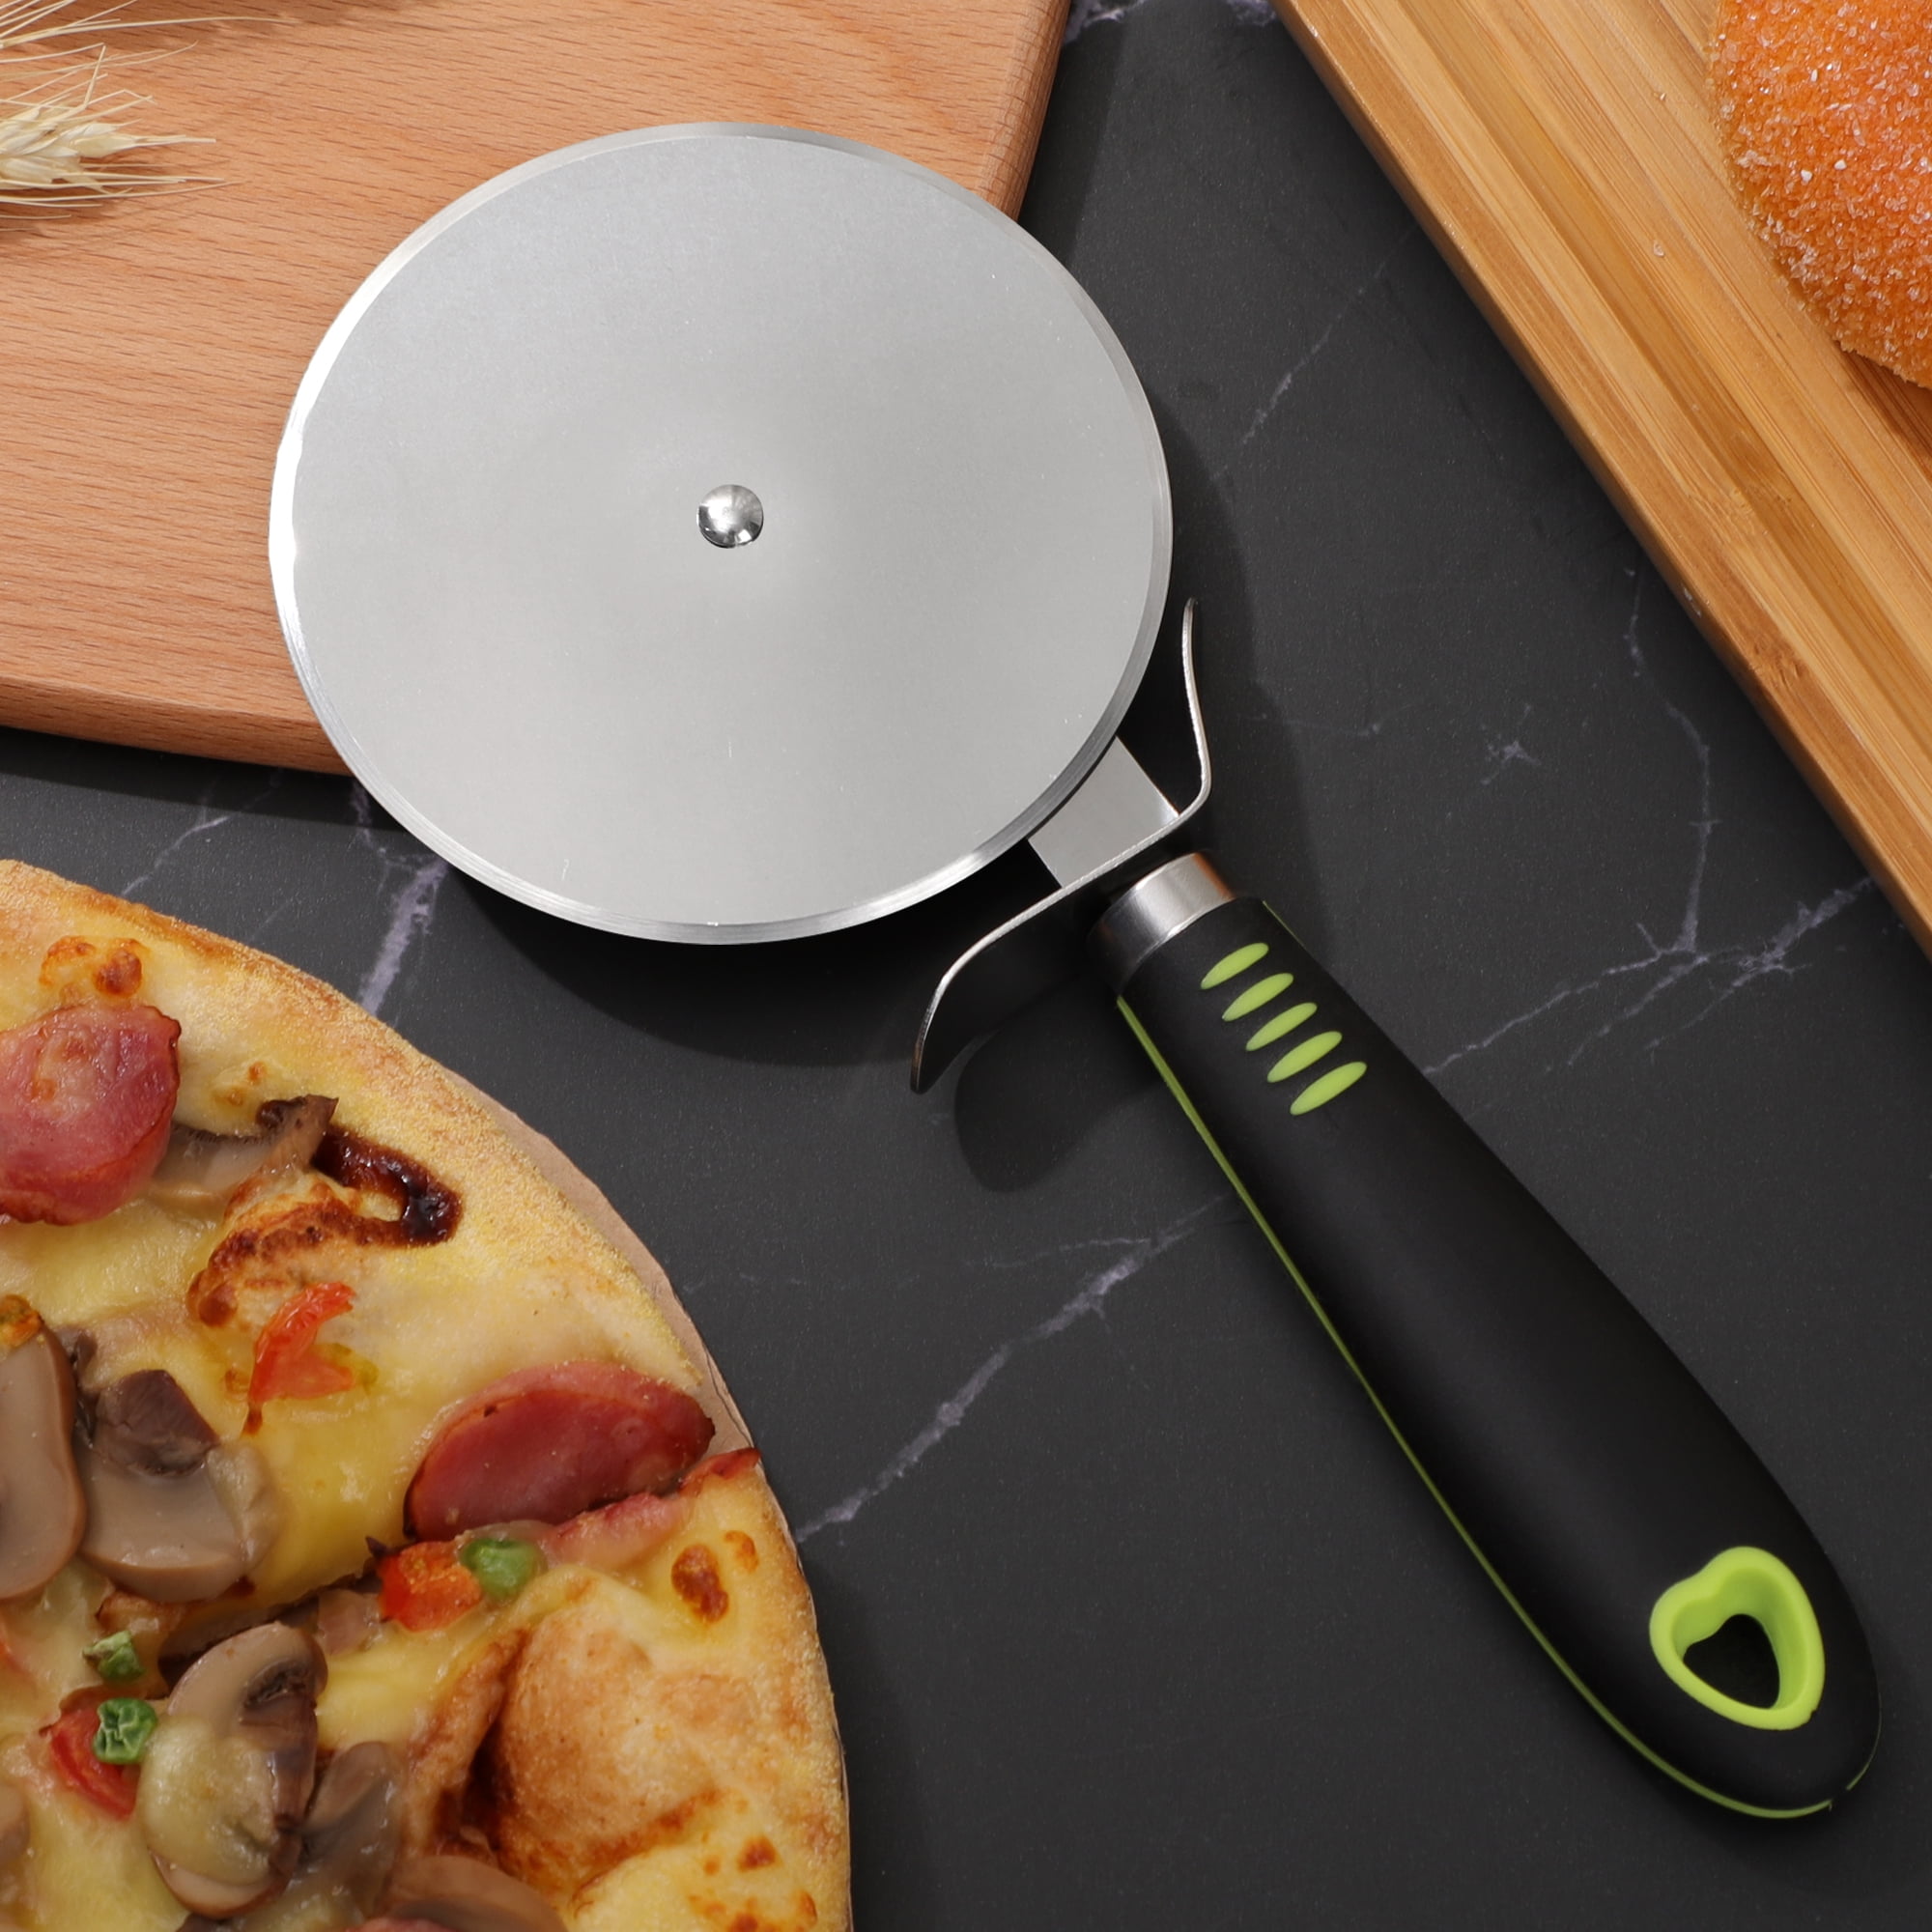 Large Pizza Cutter Professional Wheel Slicer Stainless steel 4 inch pizza cutter 